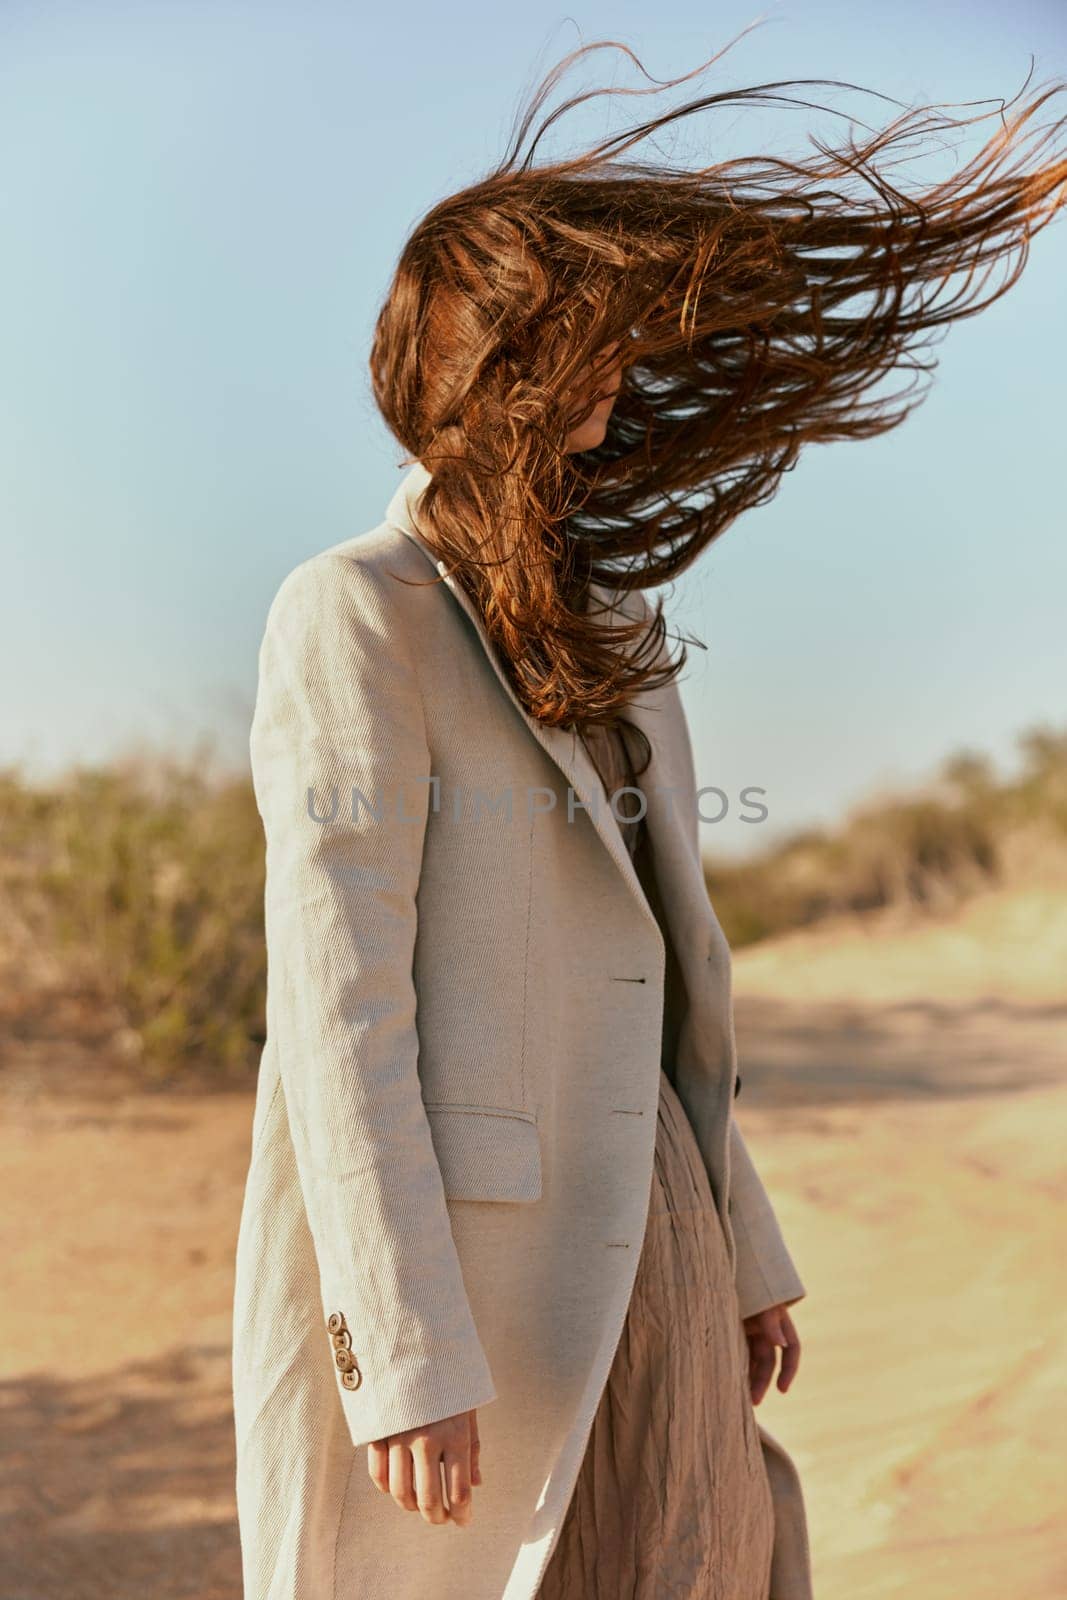 portrait of a woman in a light jacket with hair covering her face from the wind by Vichizh